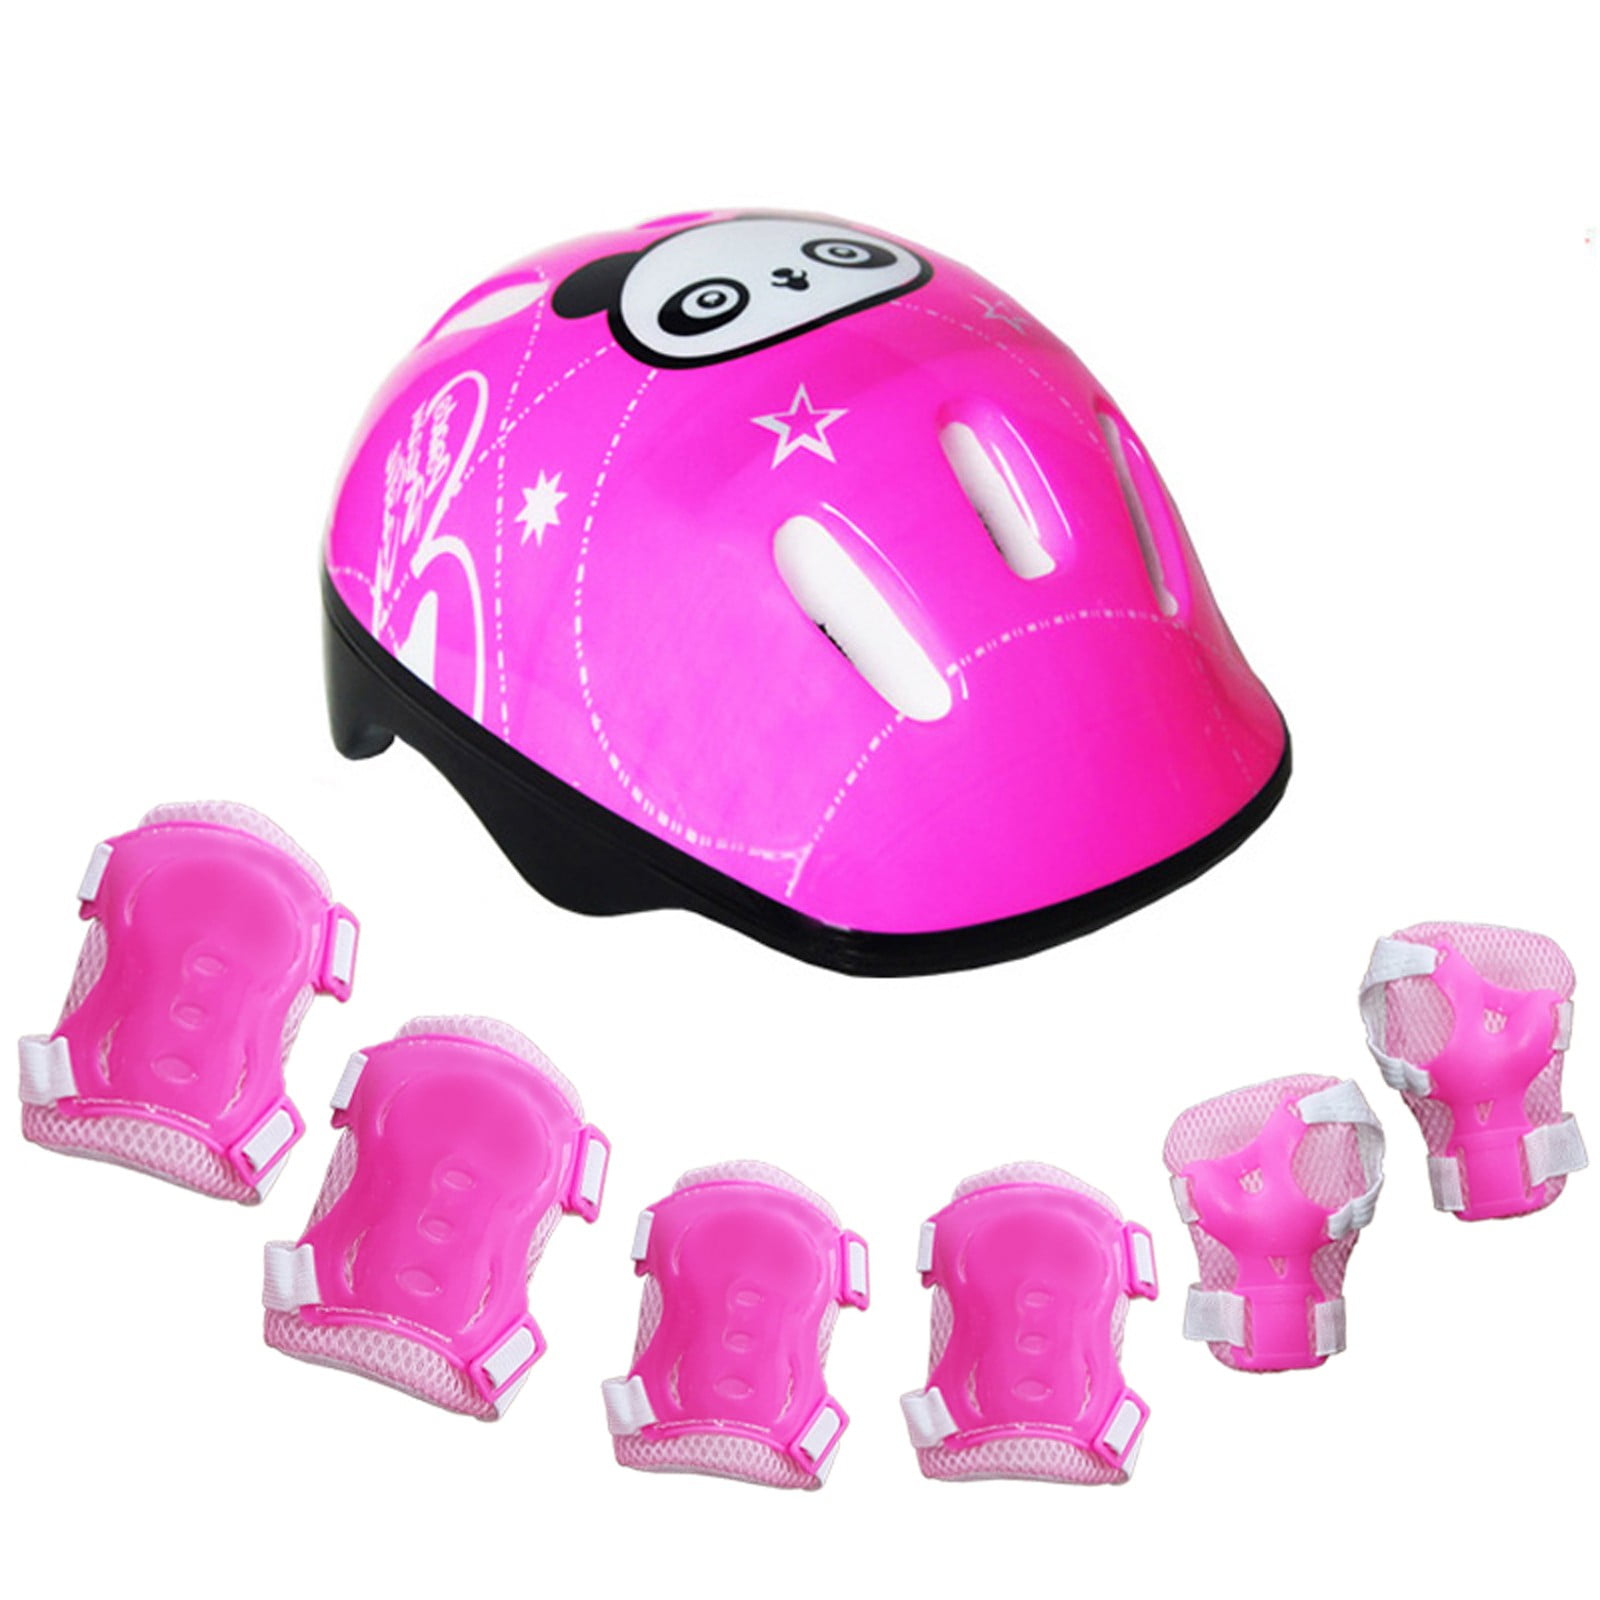 Kartium Adjustable Helmet for Skateboarding for Kids Red Teens and Young Adults